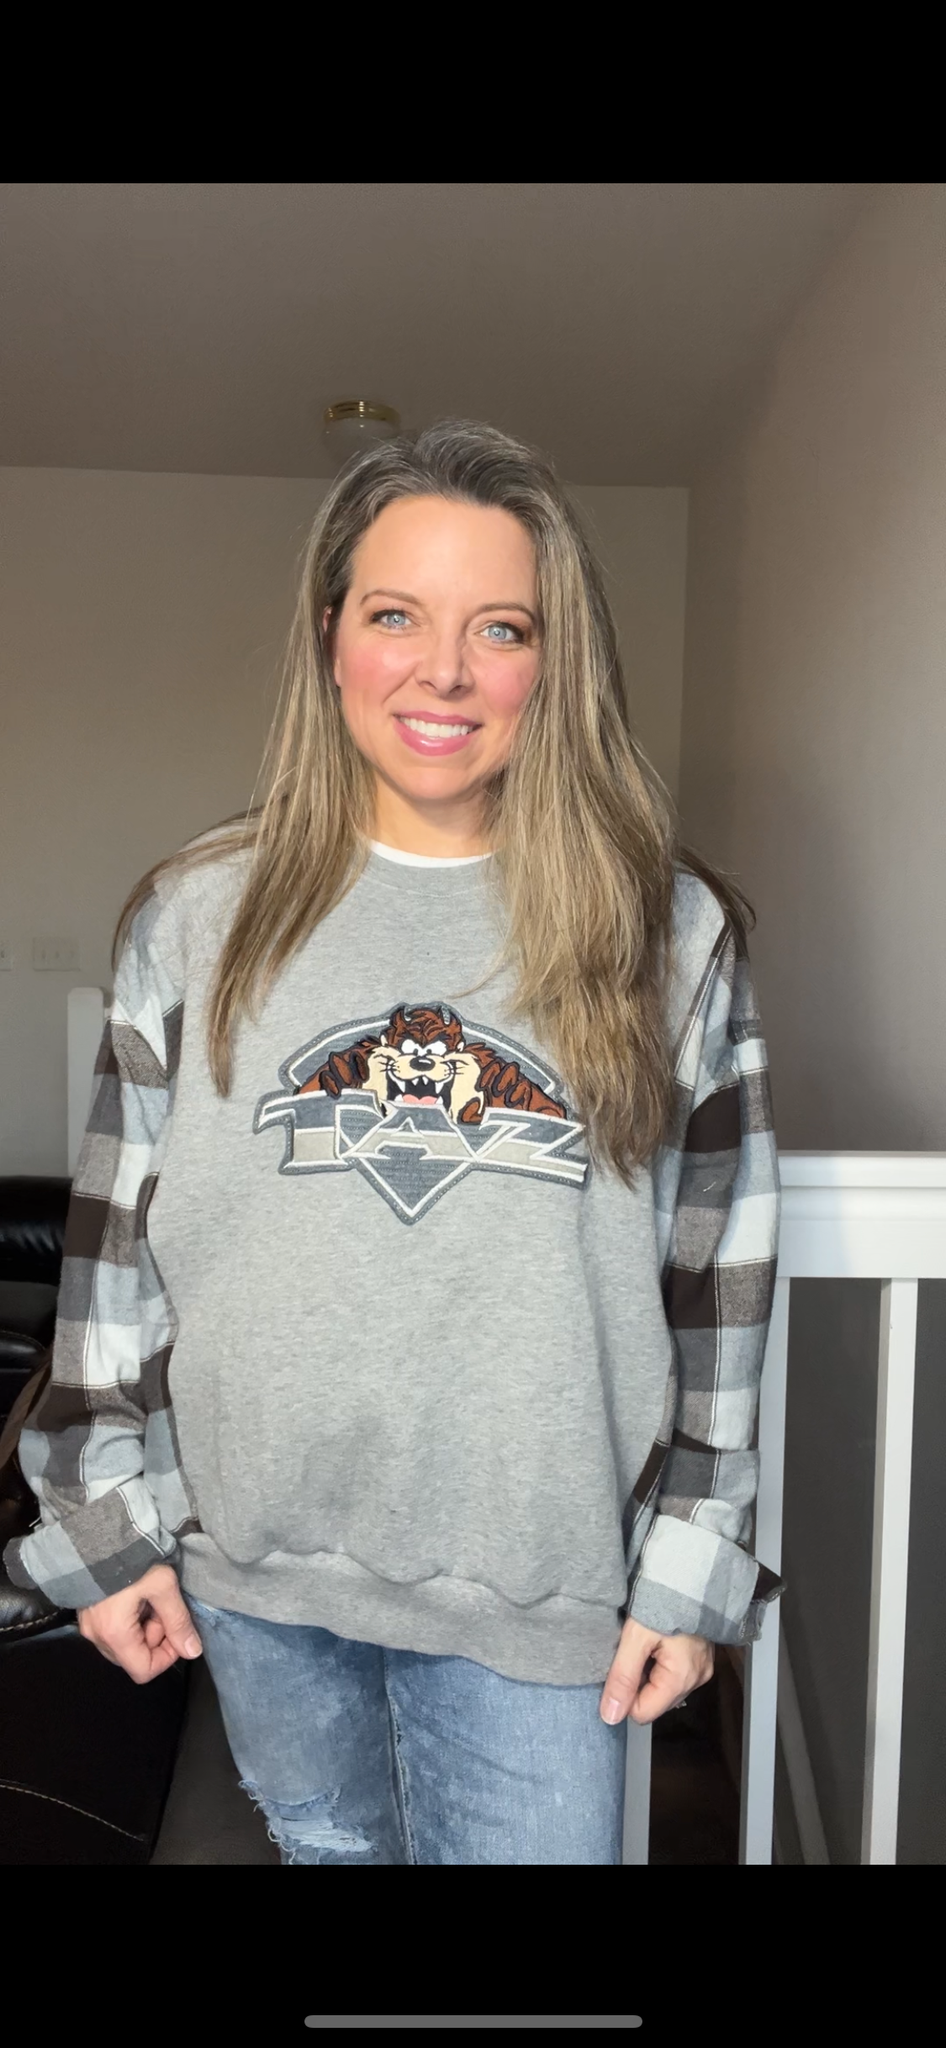 Upcycled Taz - Women’s large - thick sweatshirt with thick flannel sleeves￼